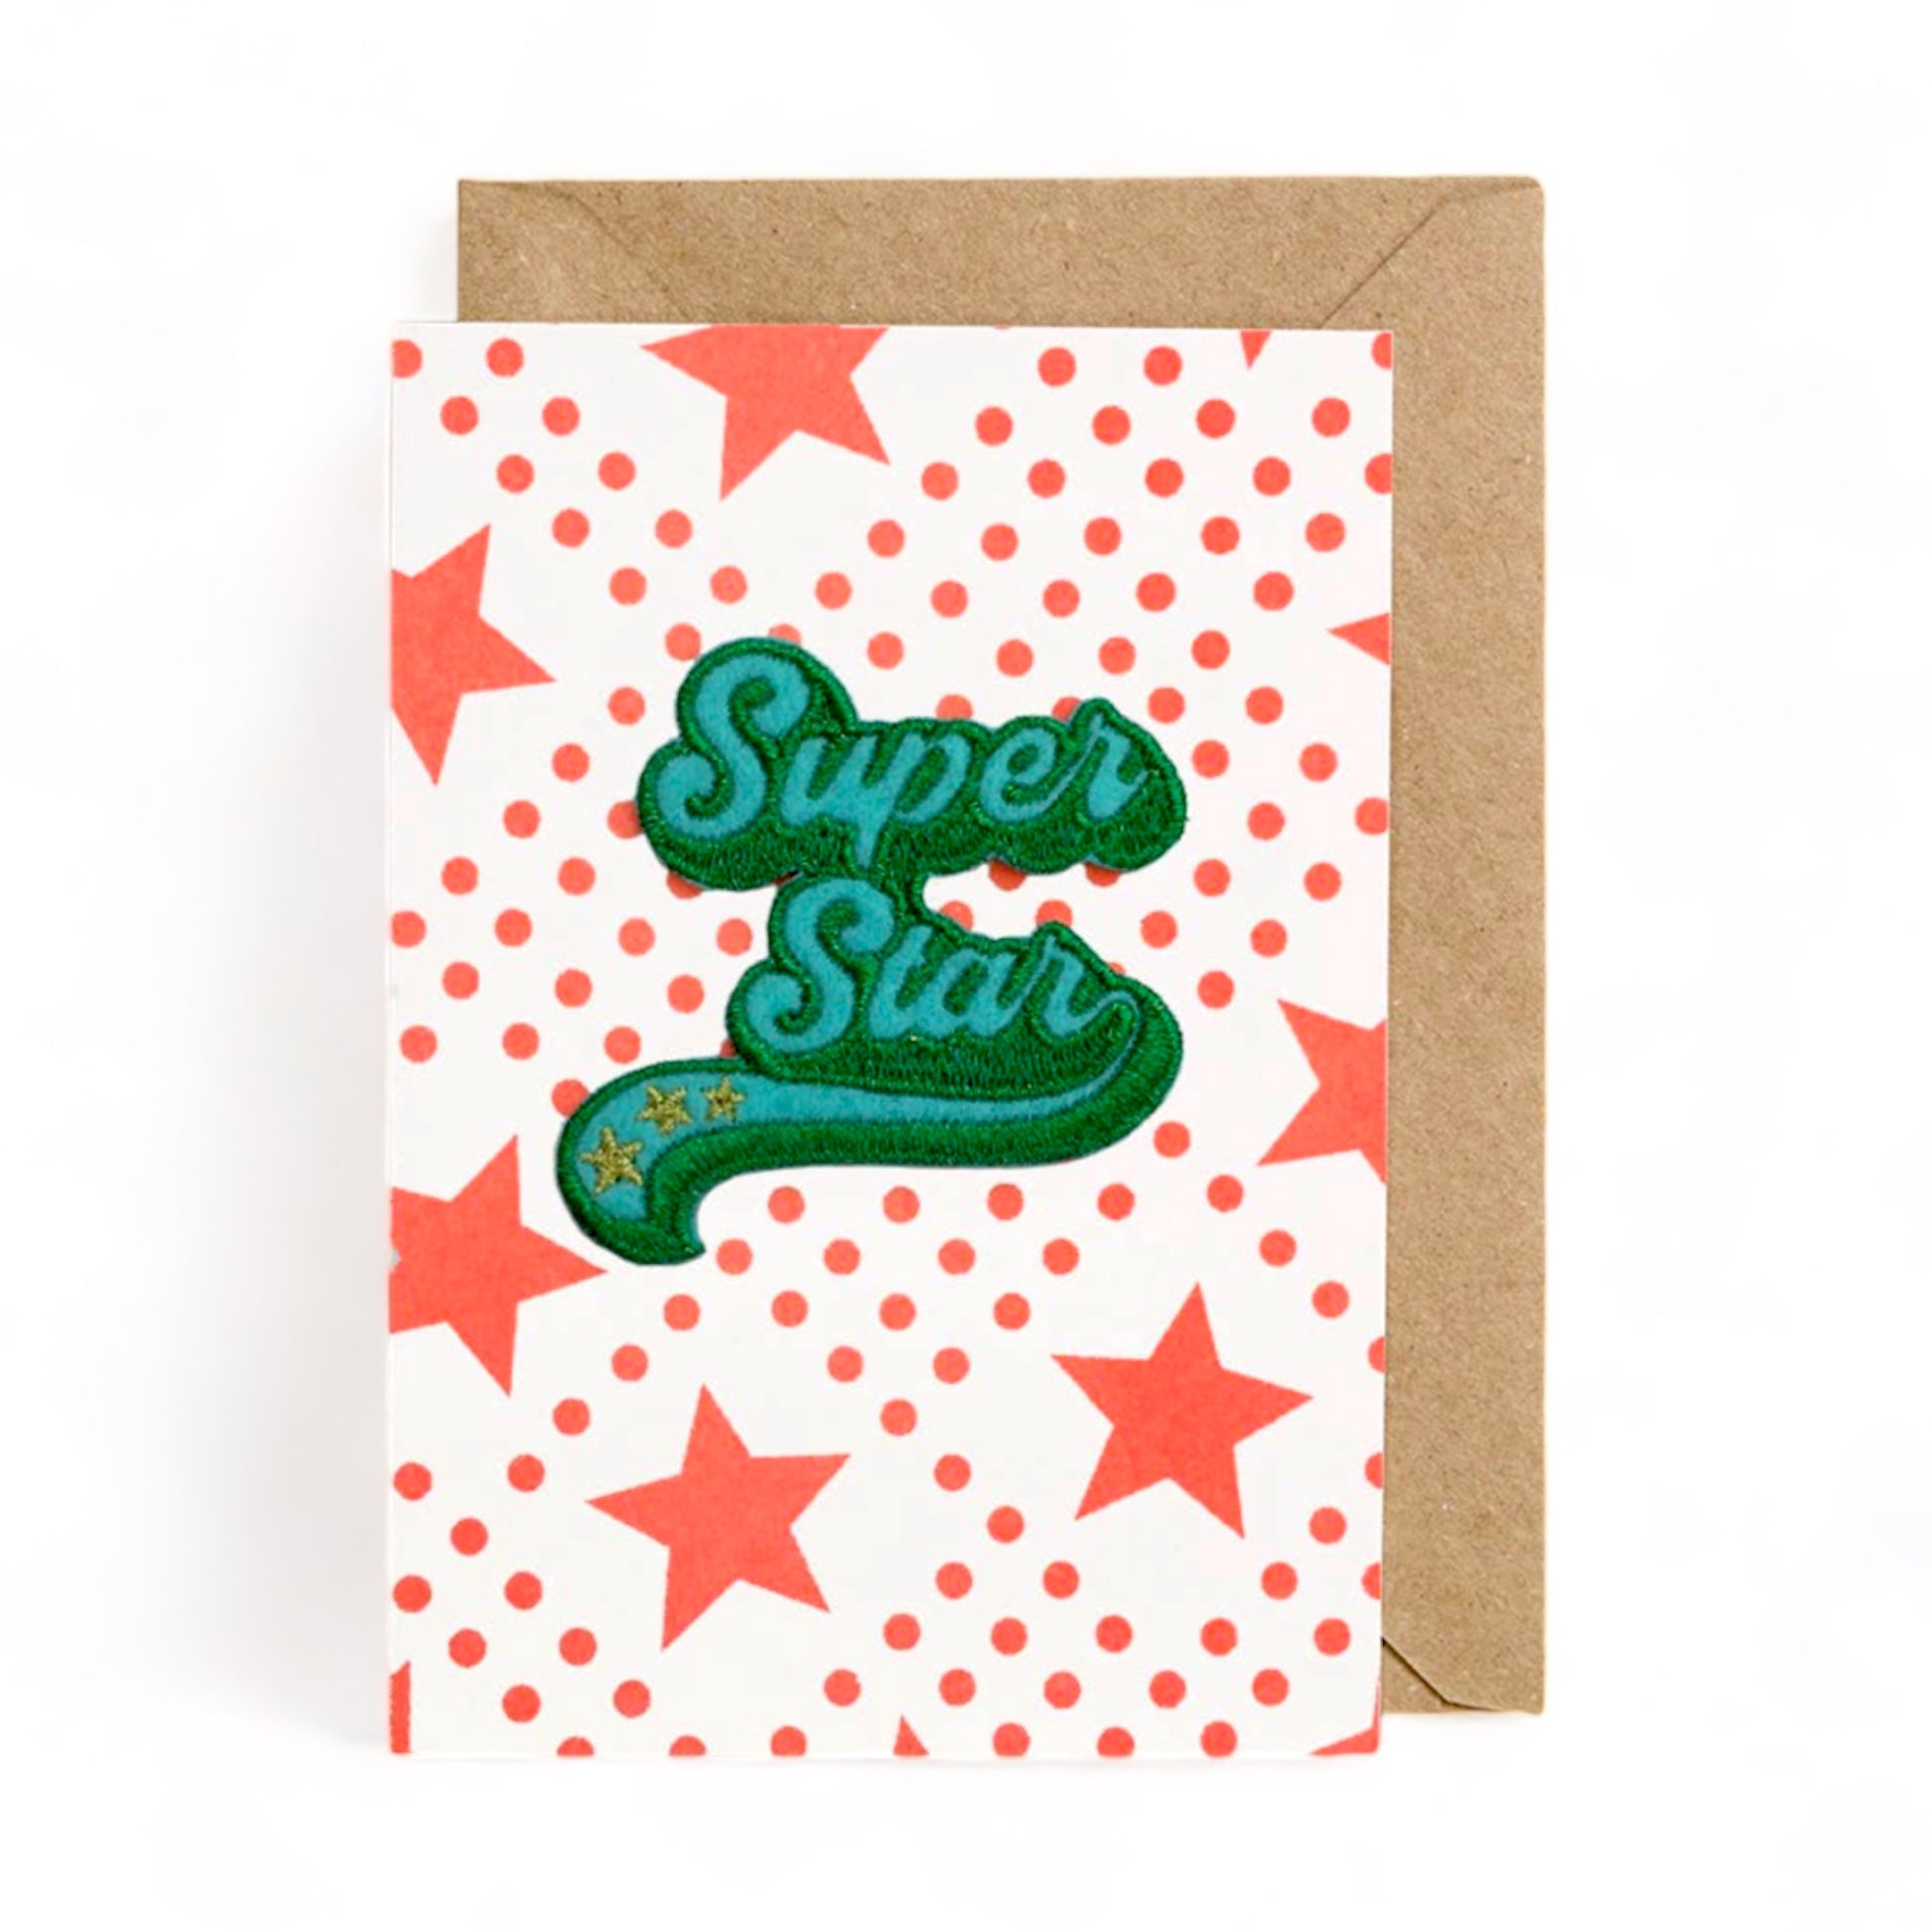 Embroidered Patch Greeting Card - Super Star - Hella Kitsch